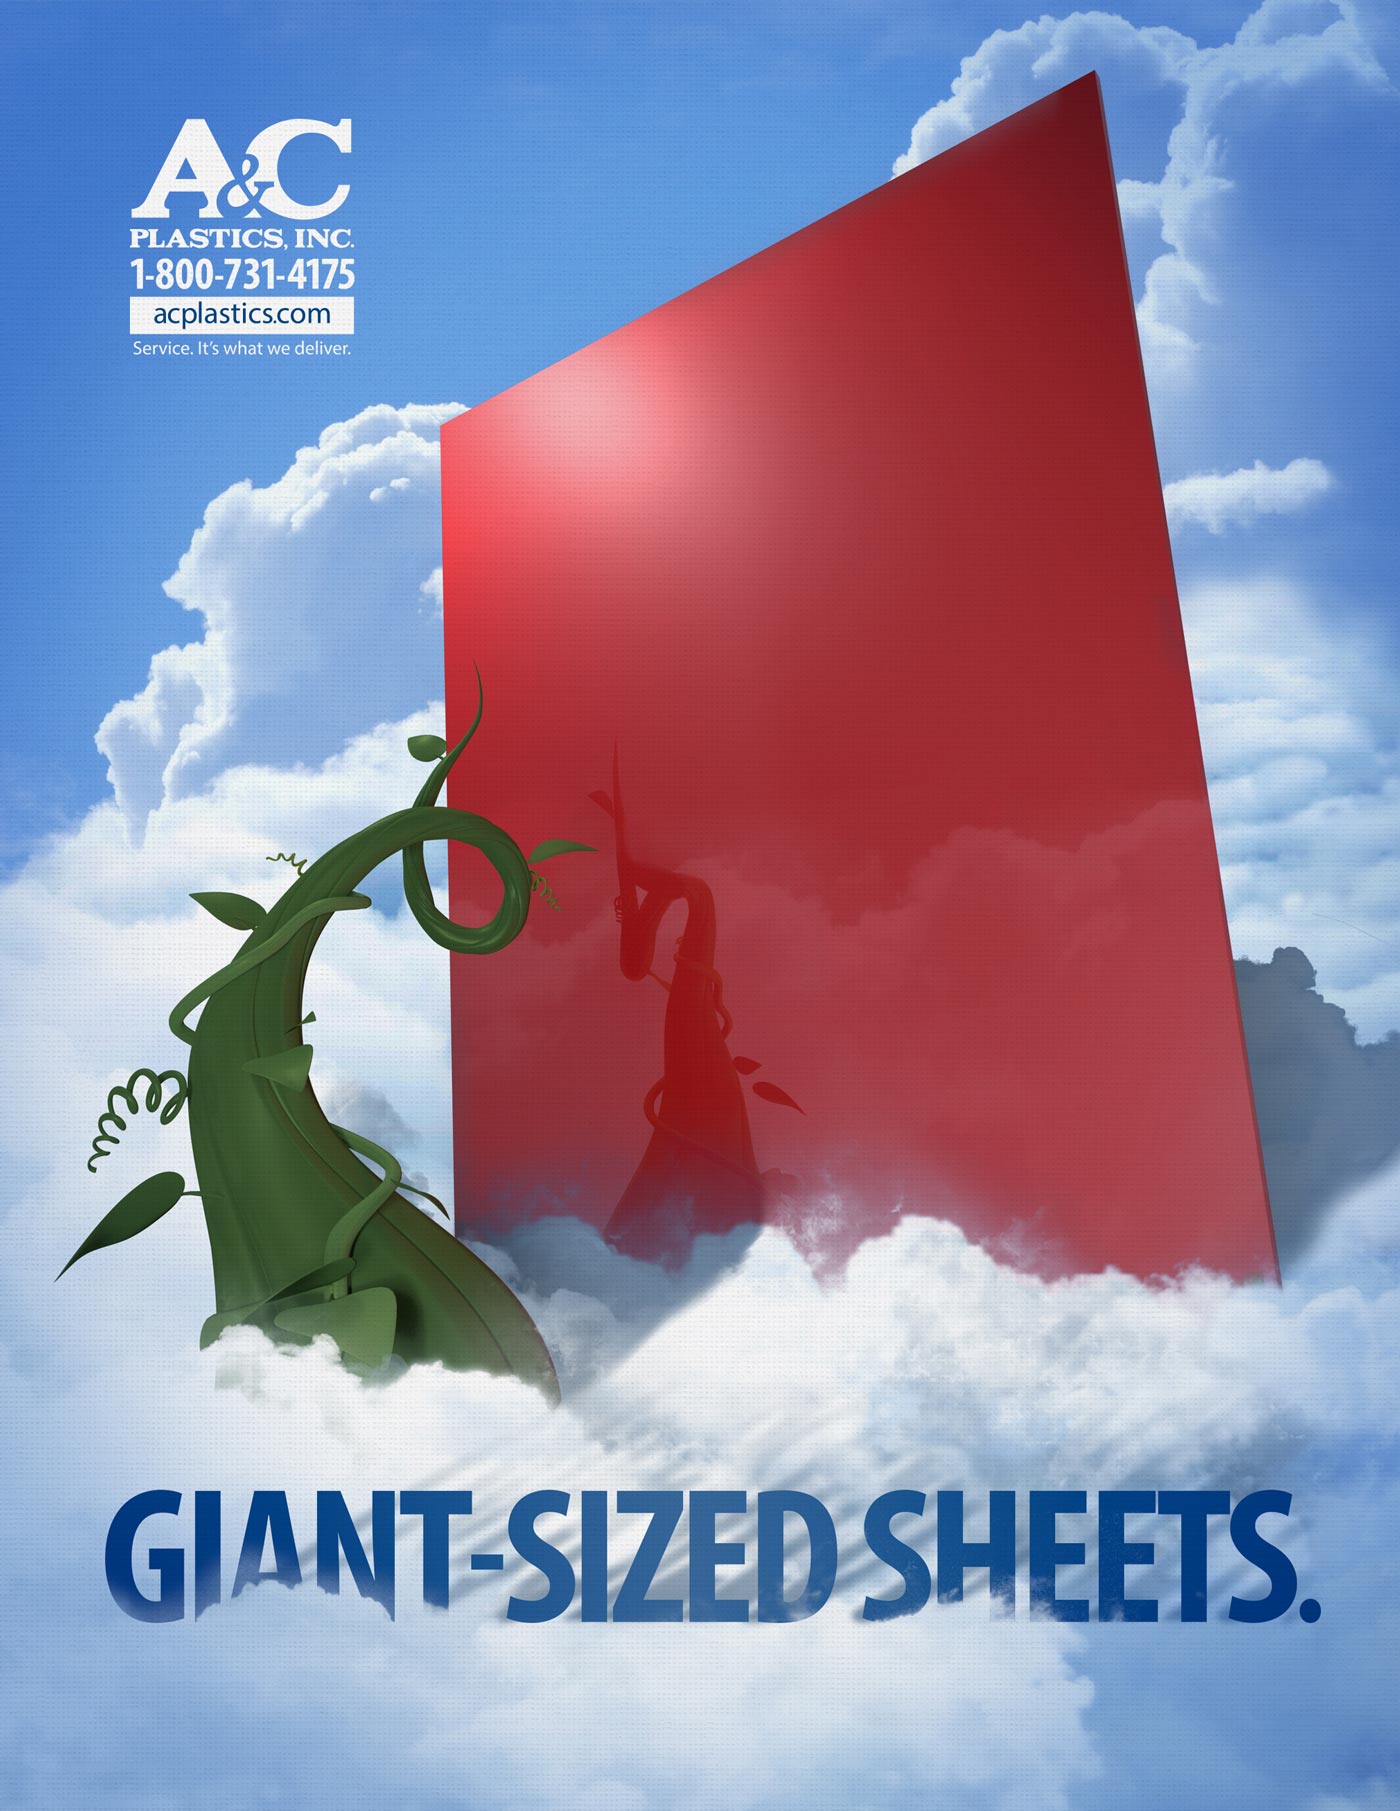 A&C Plastics, Inc., Giant-Sized Sheets - print ad by Tidal Wave Marketing